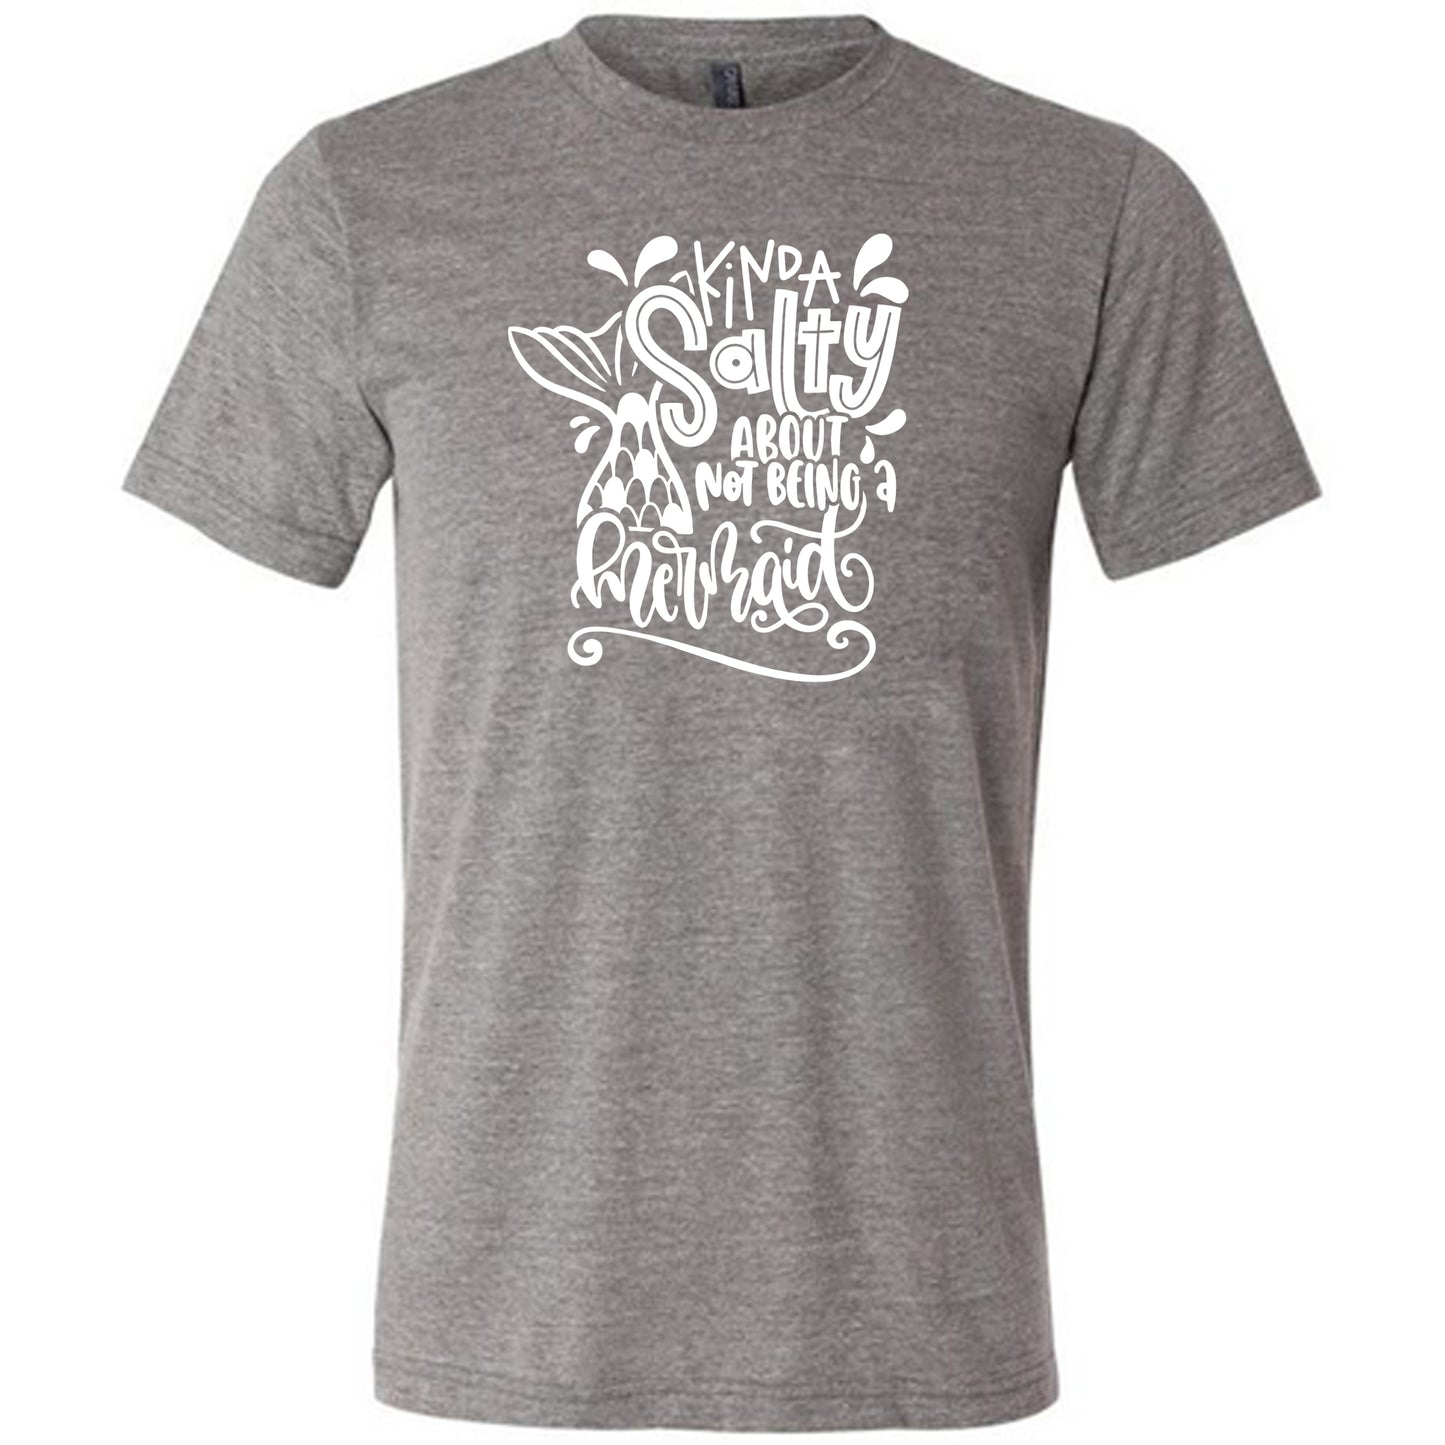 grey unisex tee with the saying "kinda salty about not being a mermaid" in the center